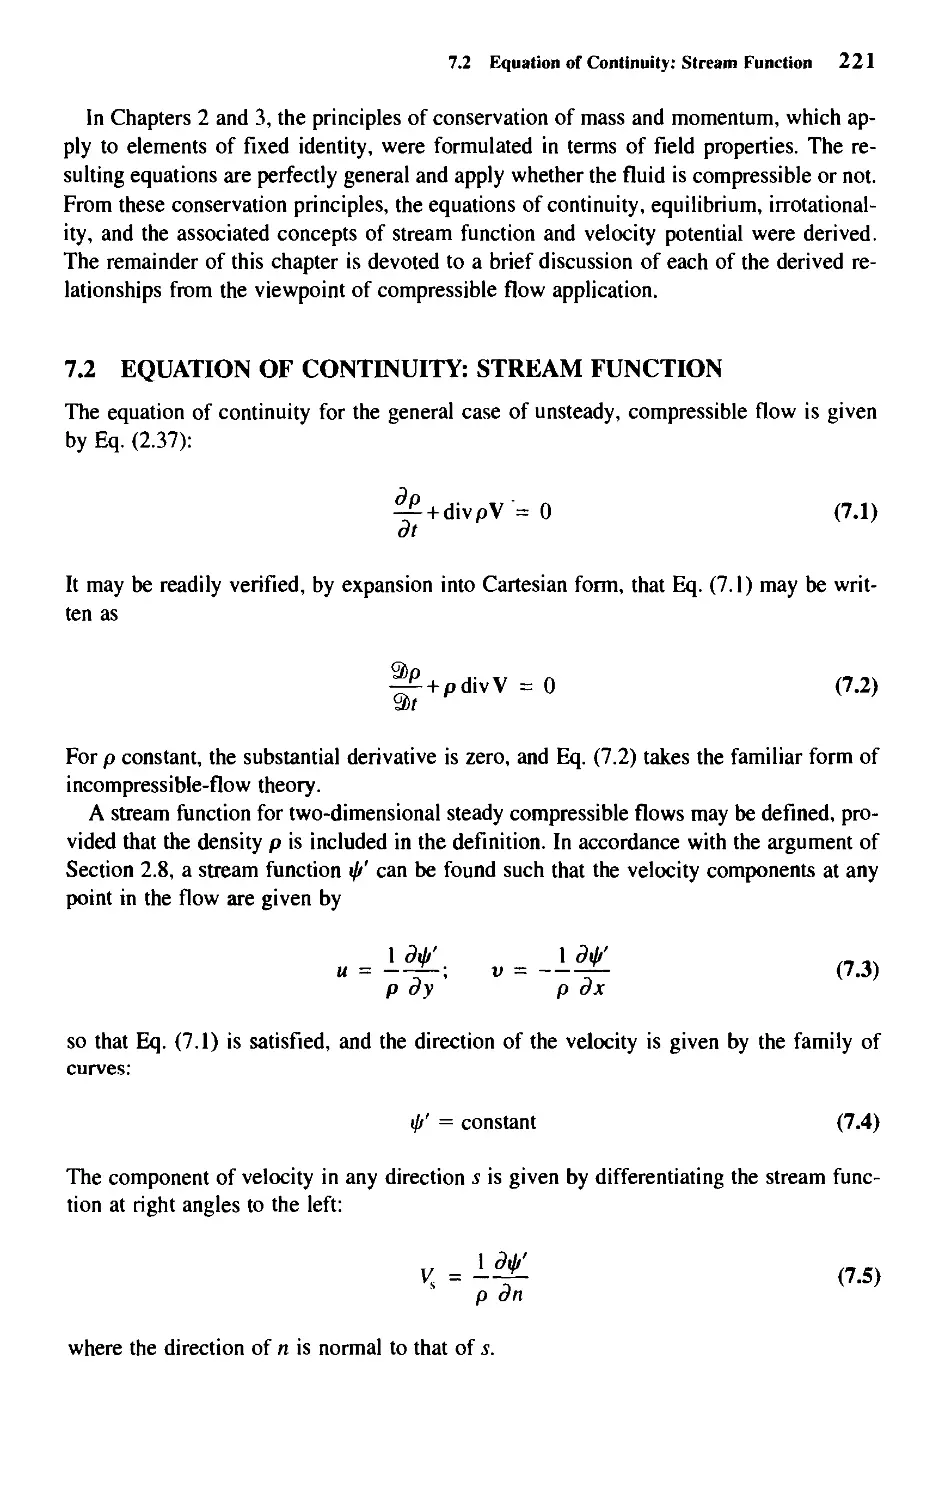 7.2 - Equation of Continuity: Stream Function